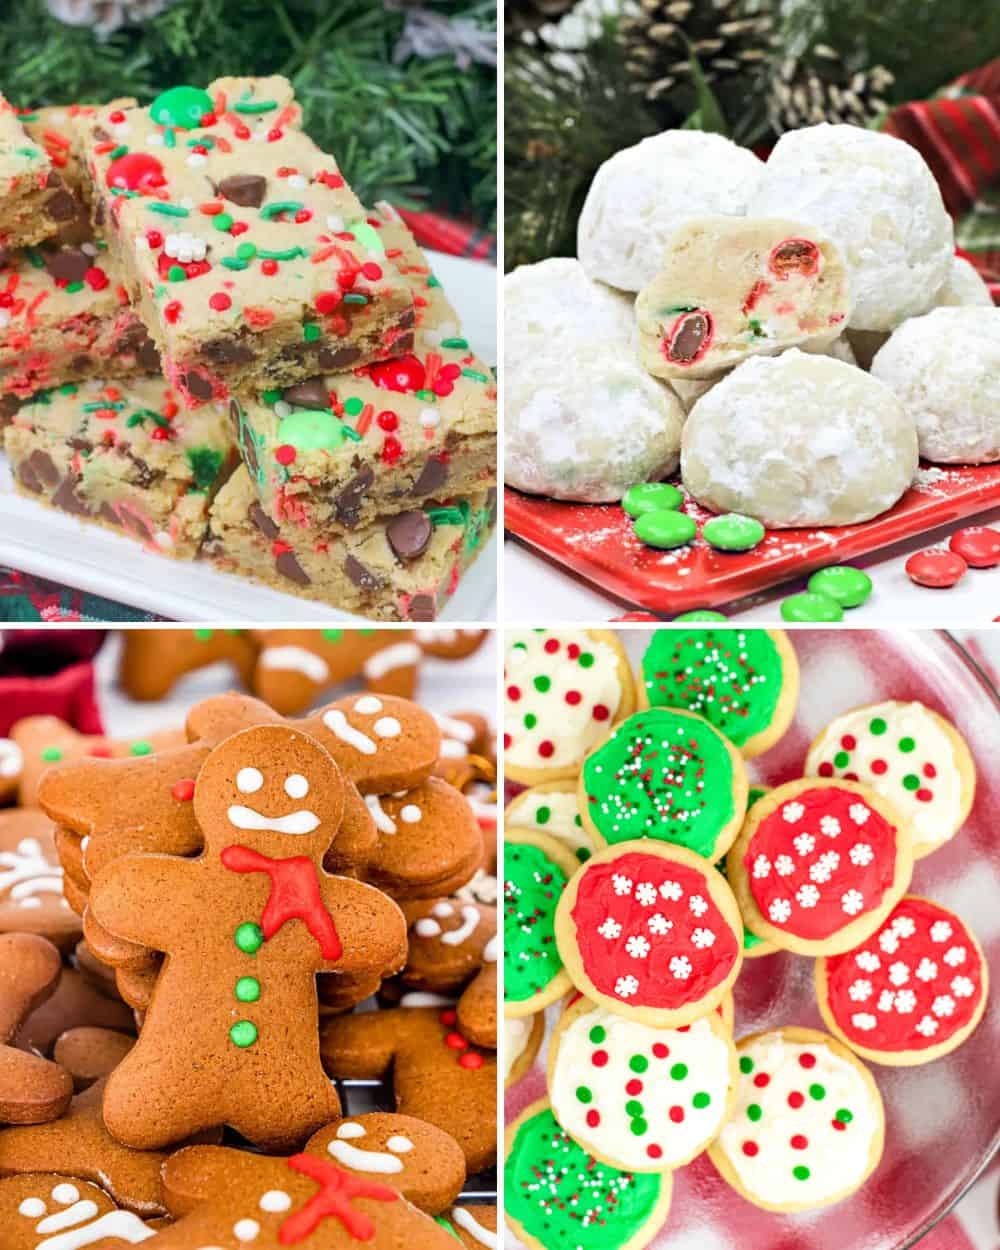 Variety of Christmas cookies: Christmas cookie bars, snowball cookies, gingerbread men, and frosted pudding sugar cookies.